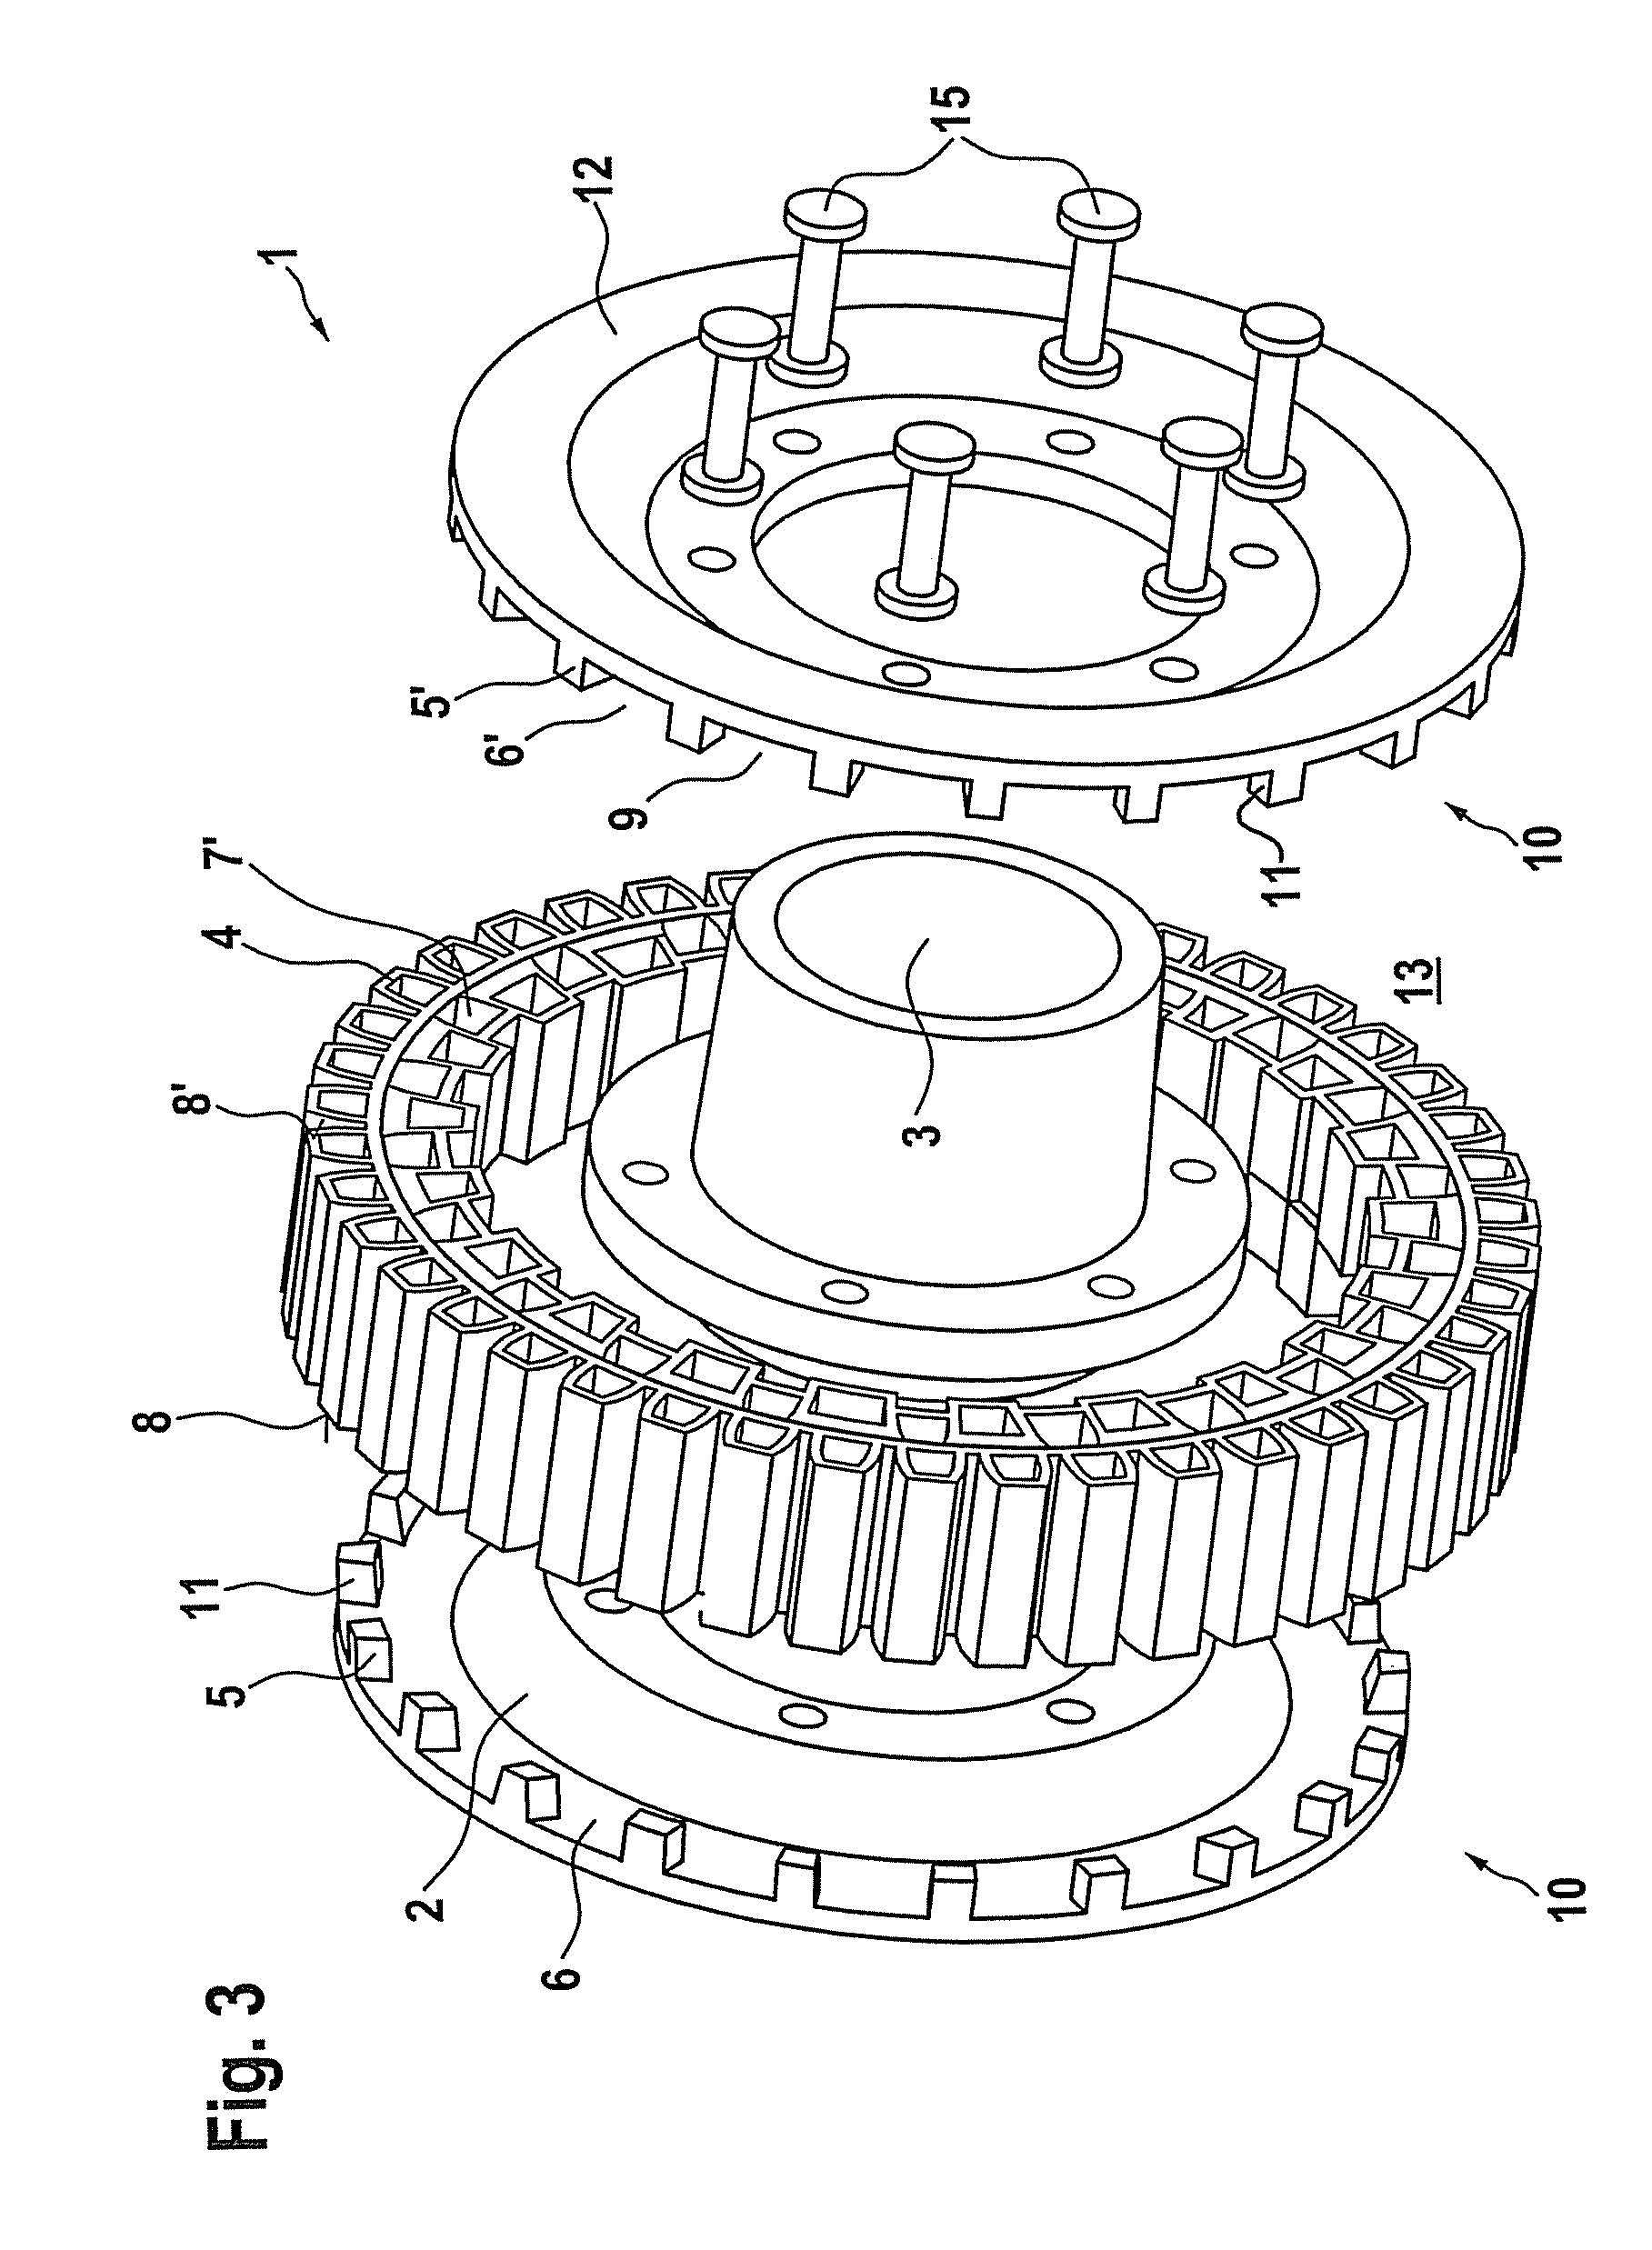 Power-assisted steering system or power steering system